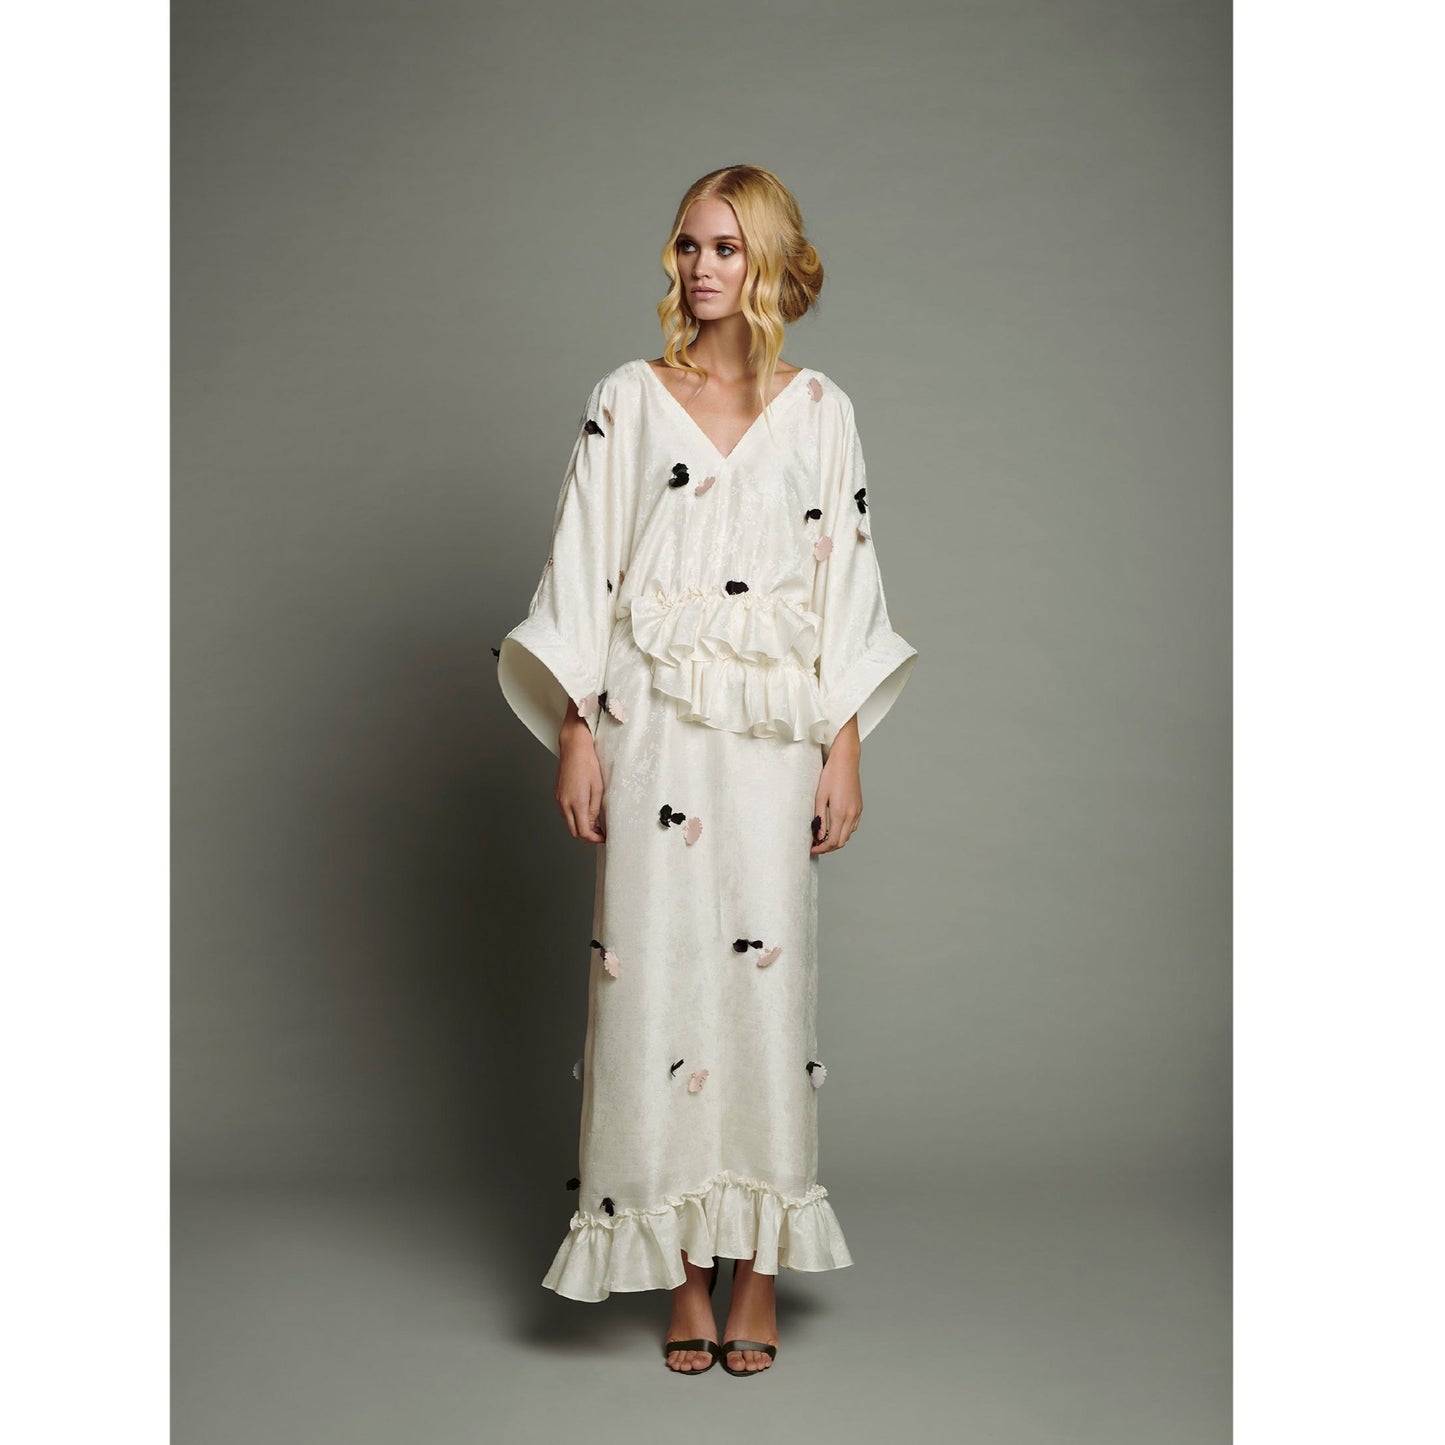 White Jacquard Maxi Dress with Horse Hair Ribbon Sleeve Trim and Bordeaux and Nude 3D Petal Appliqué